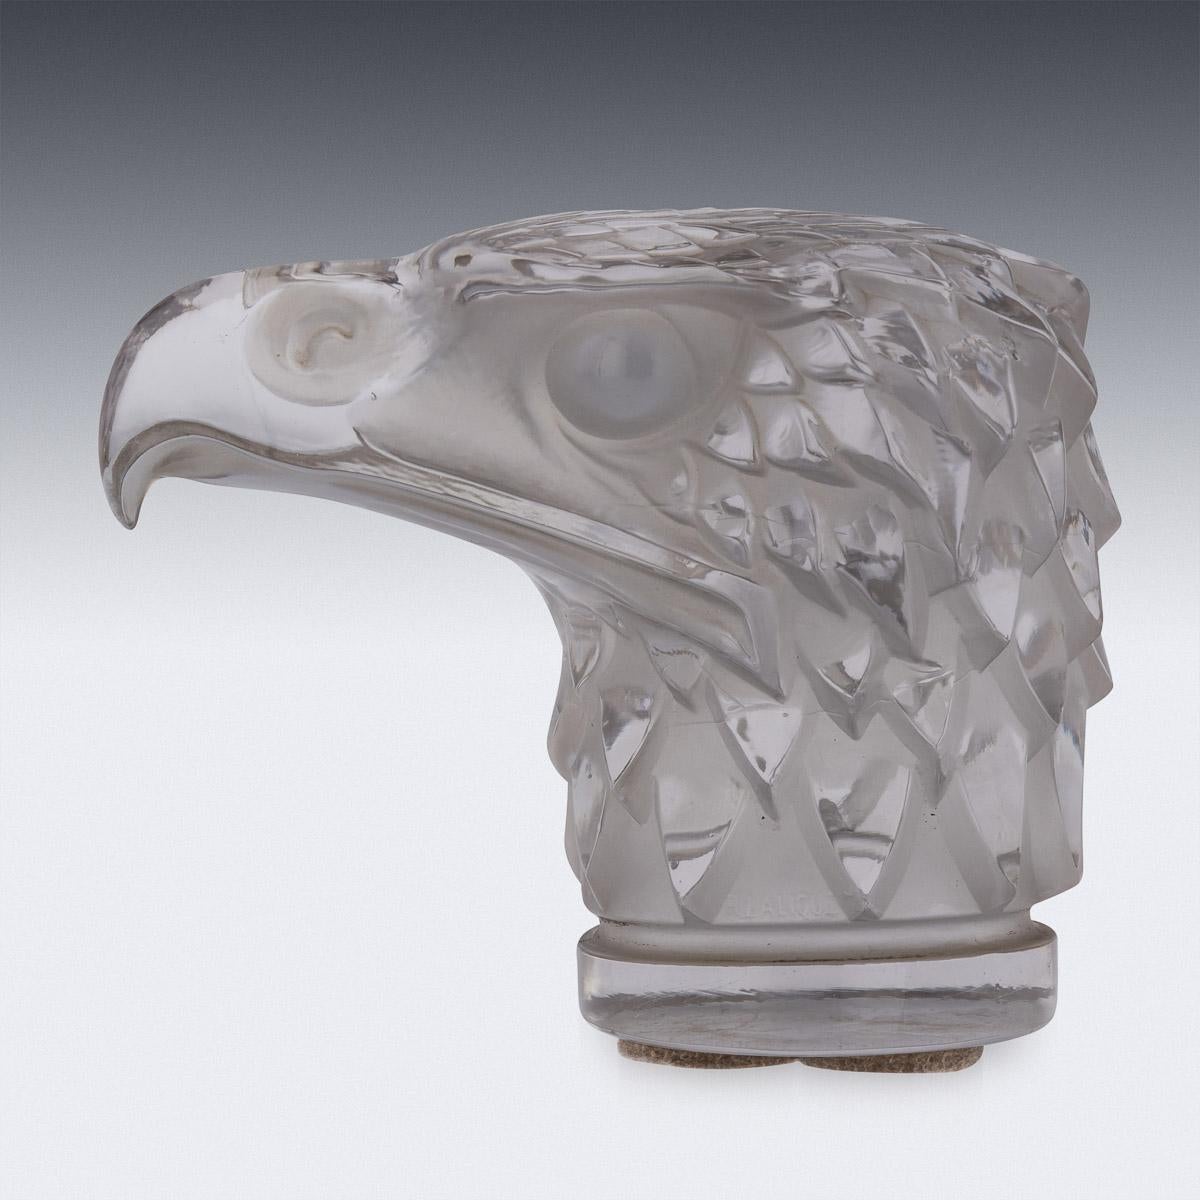 Antique 20th century French Art Deco “Tête d’Aigle” Car Mascot by René Lalique. A superb, well detailed, frosted and polished glass car mascot of an eagle’s head with fine moulded and hand finished details, signed R.Lalique France, Date Introduced: